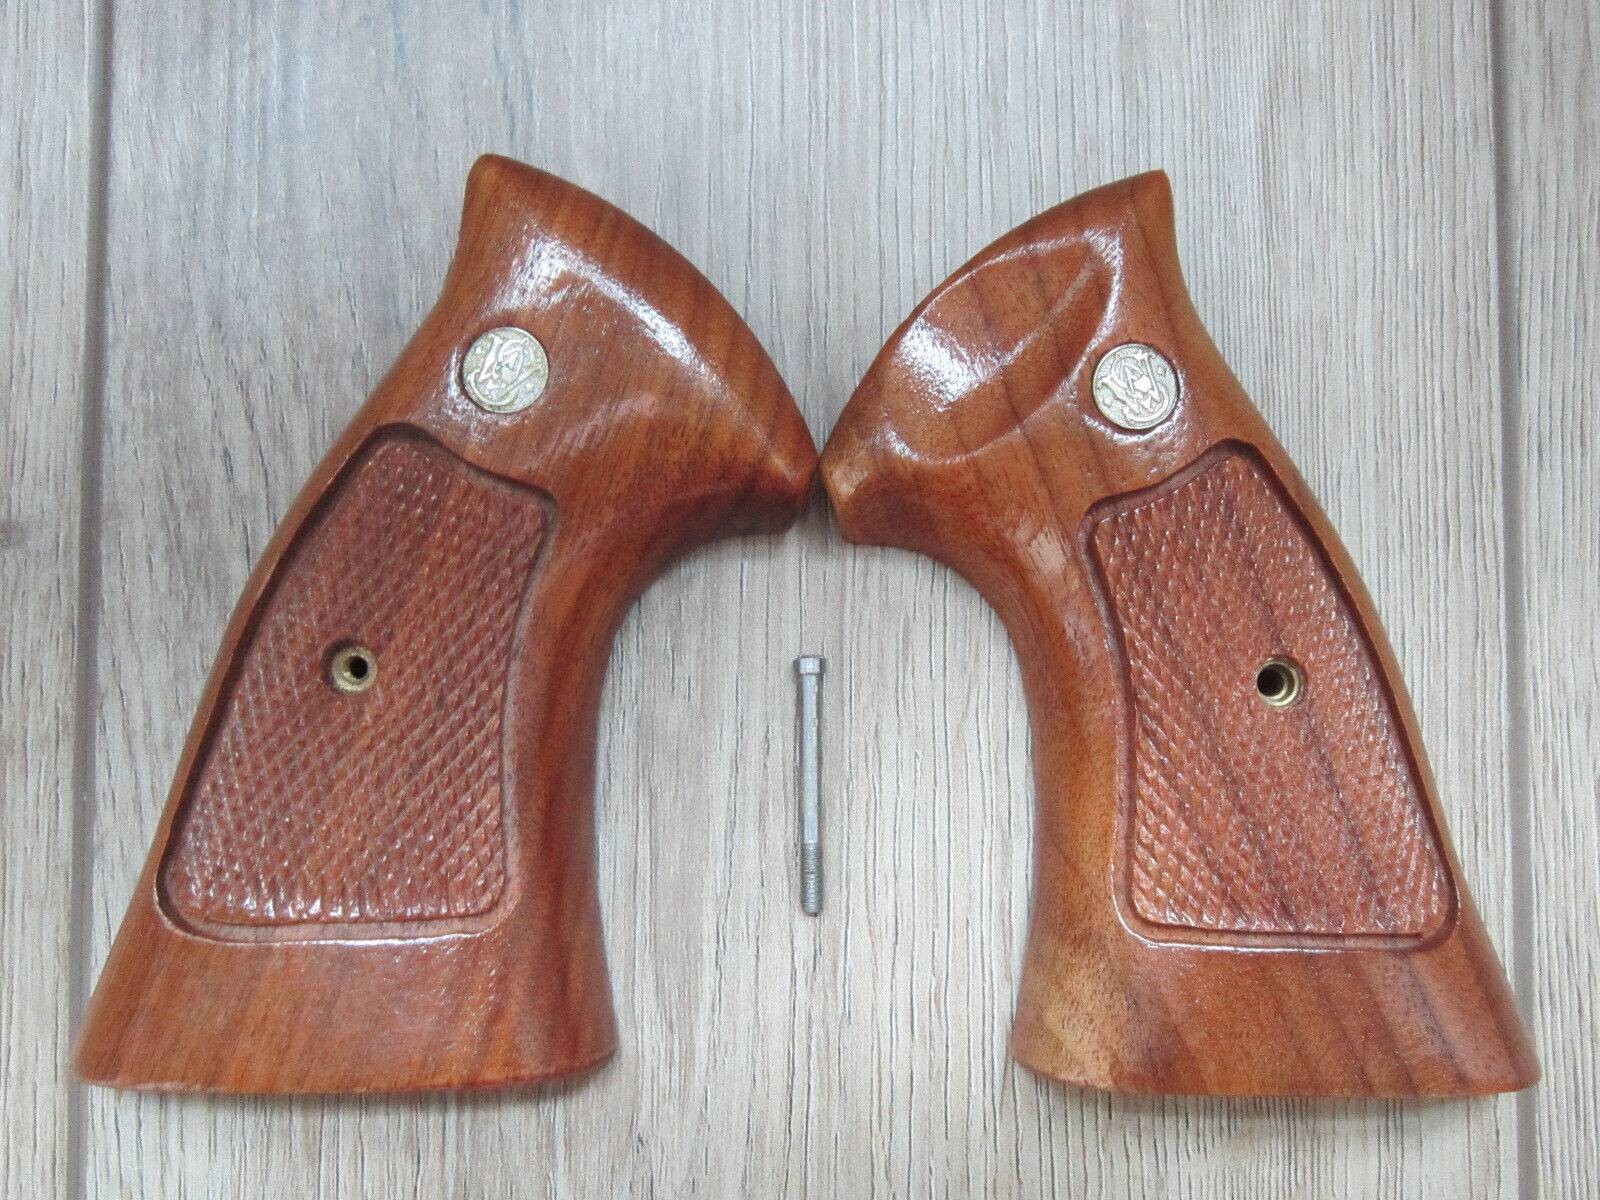 S&W N Frame Grips Vintage Factory Walnut Target Football Cut Smith & Wesson NTO